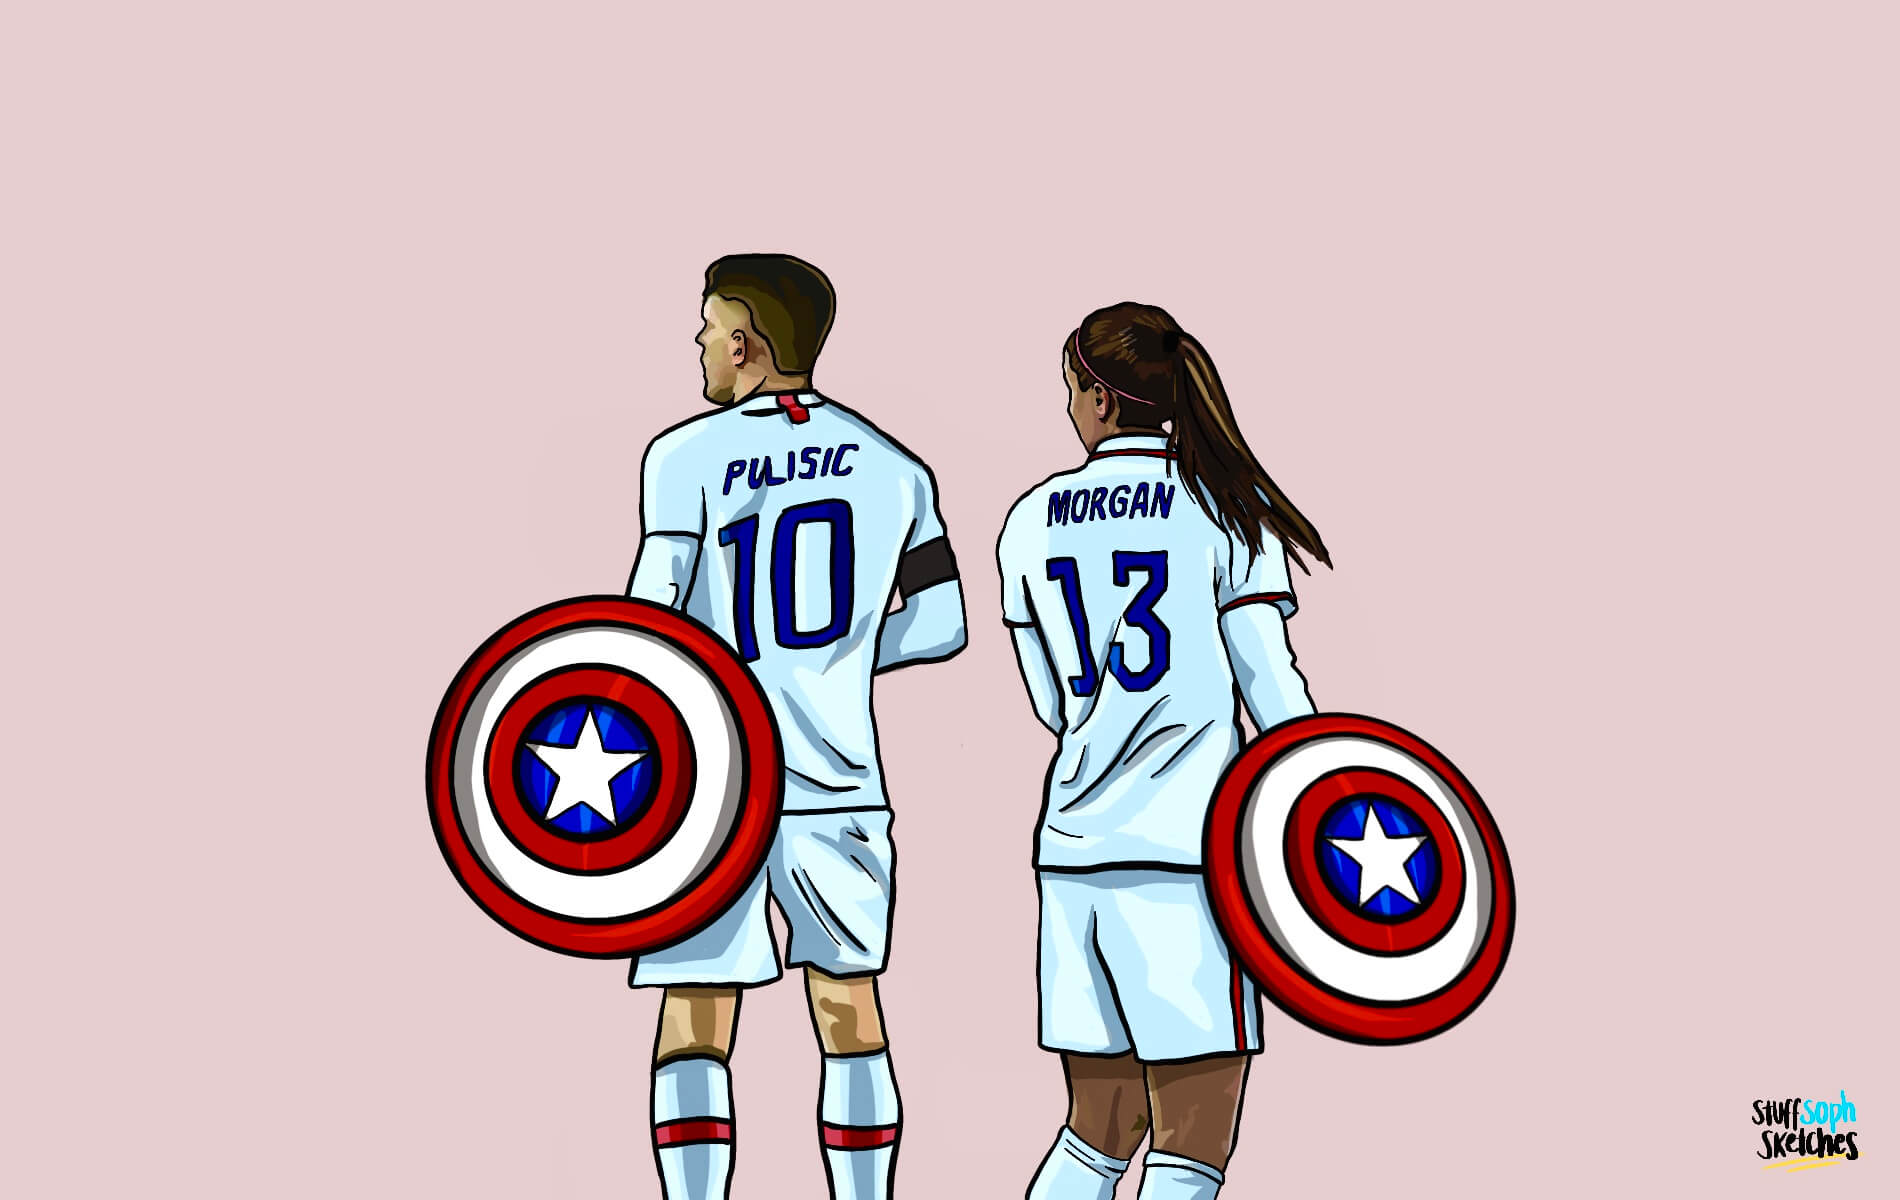 Pulisic and Morgan holding Captain America Style Shields